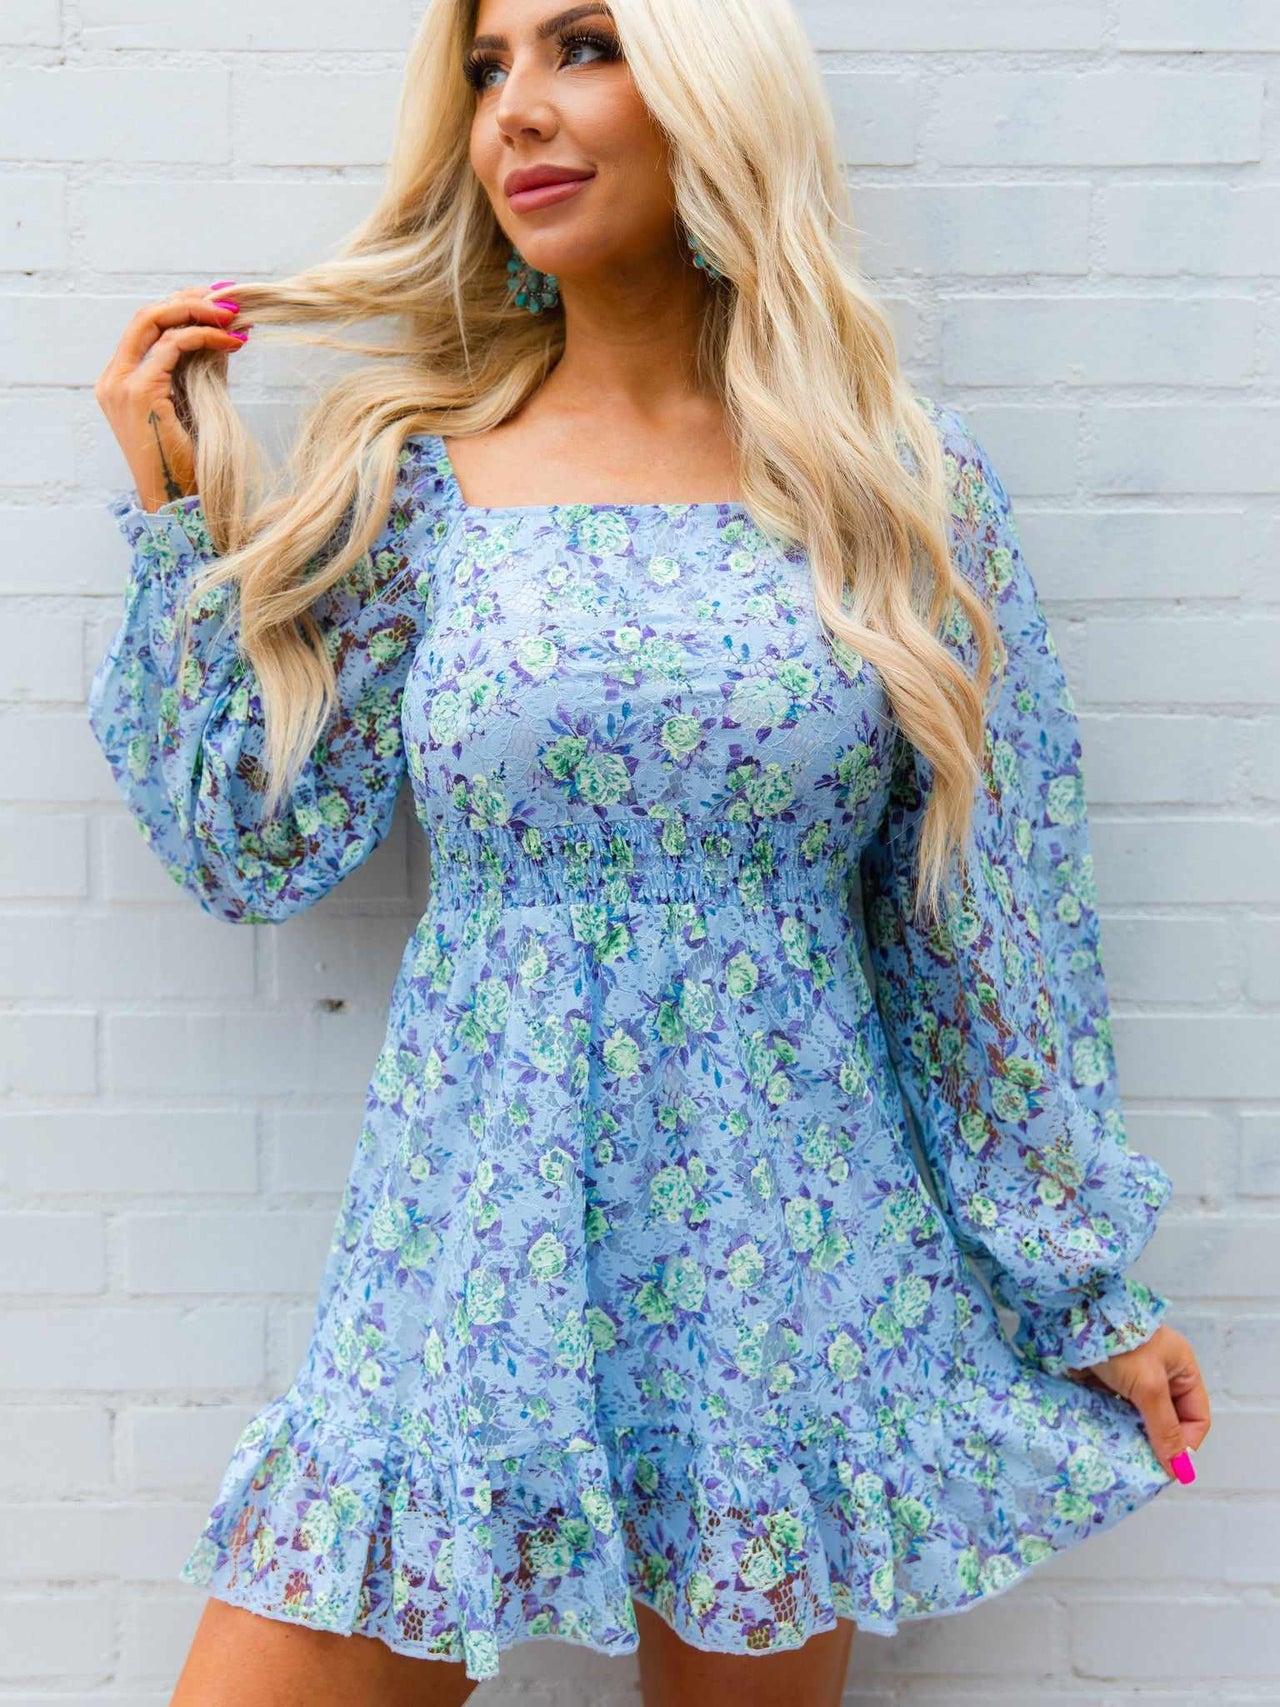 All Squared Away Dress - Lavender Floral